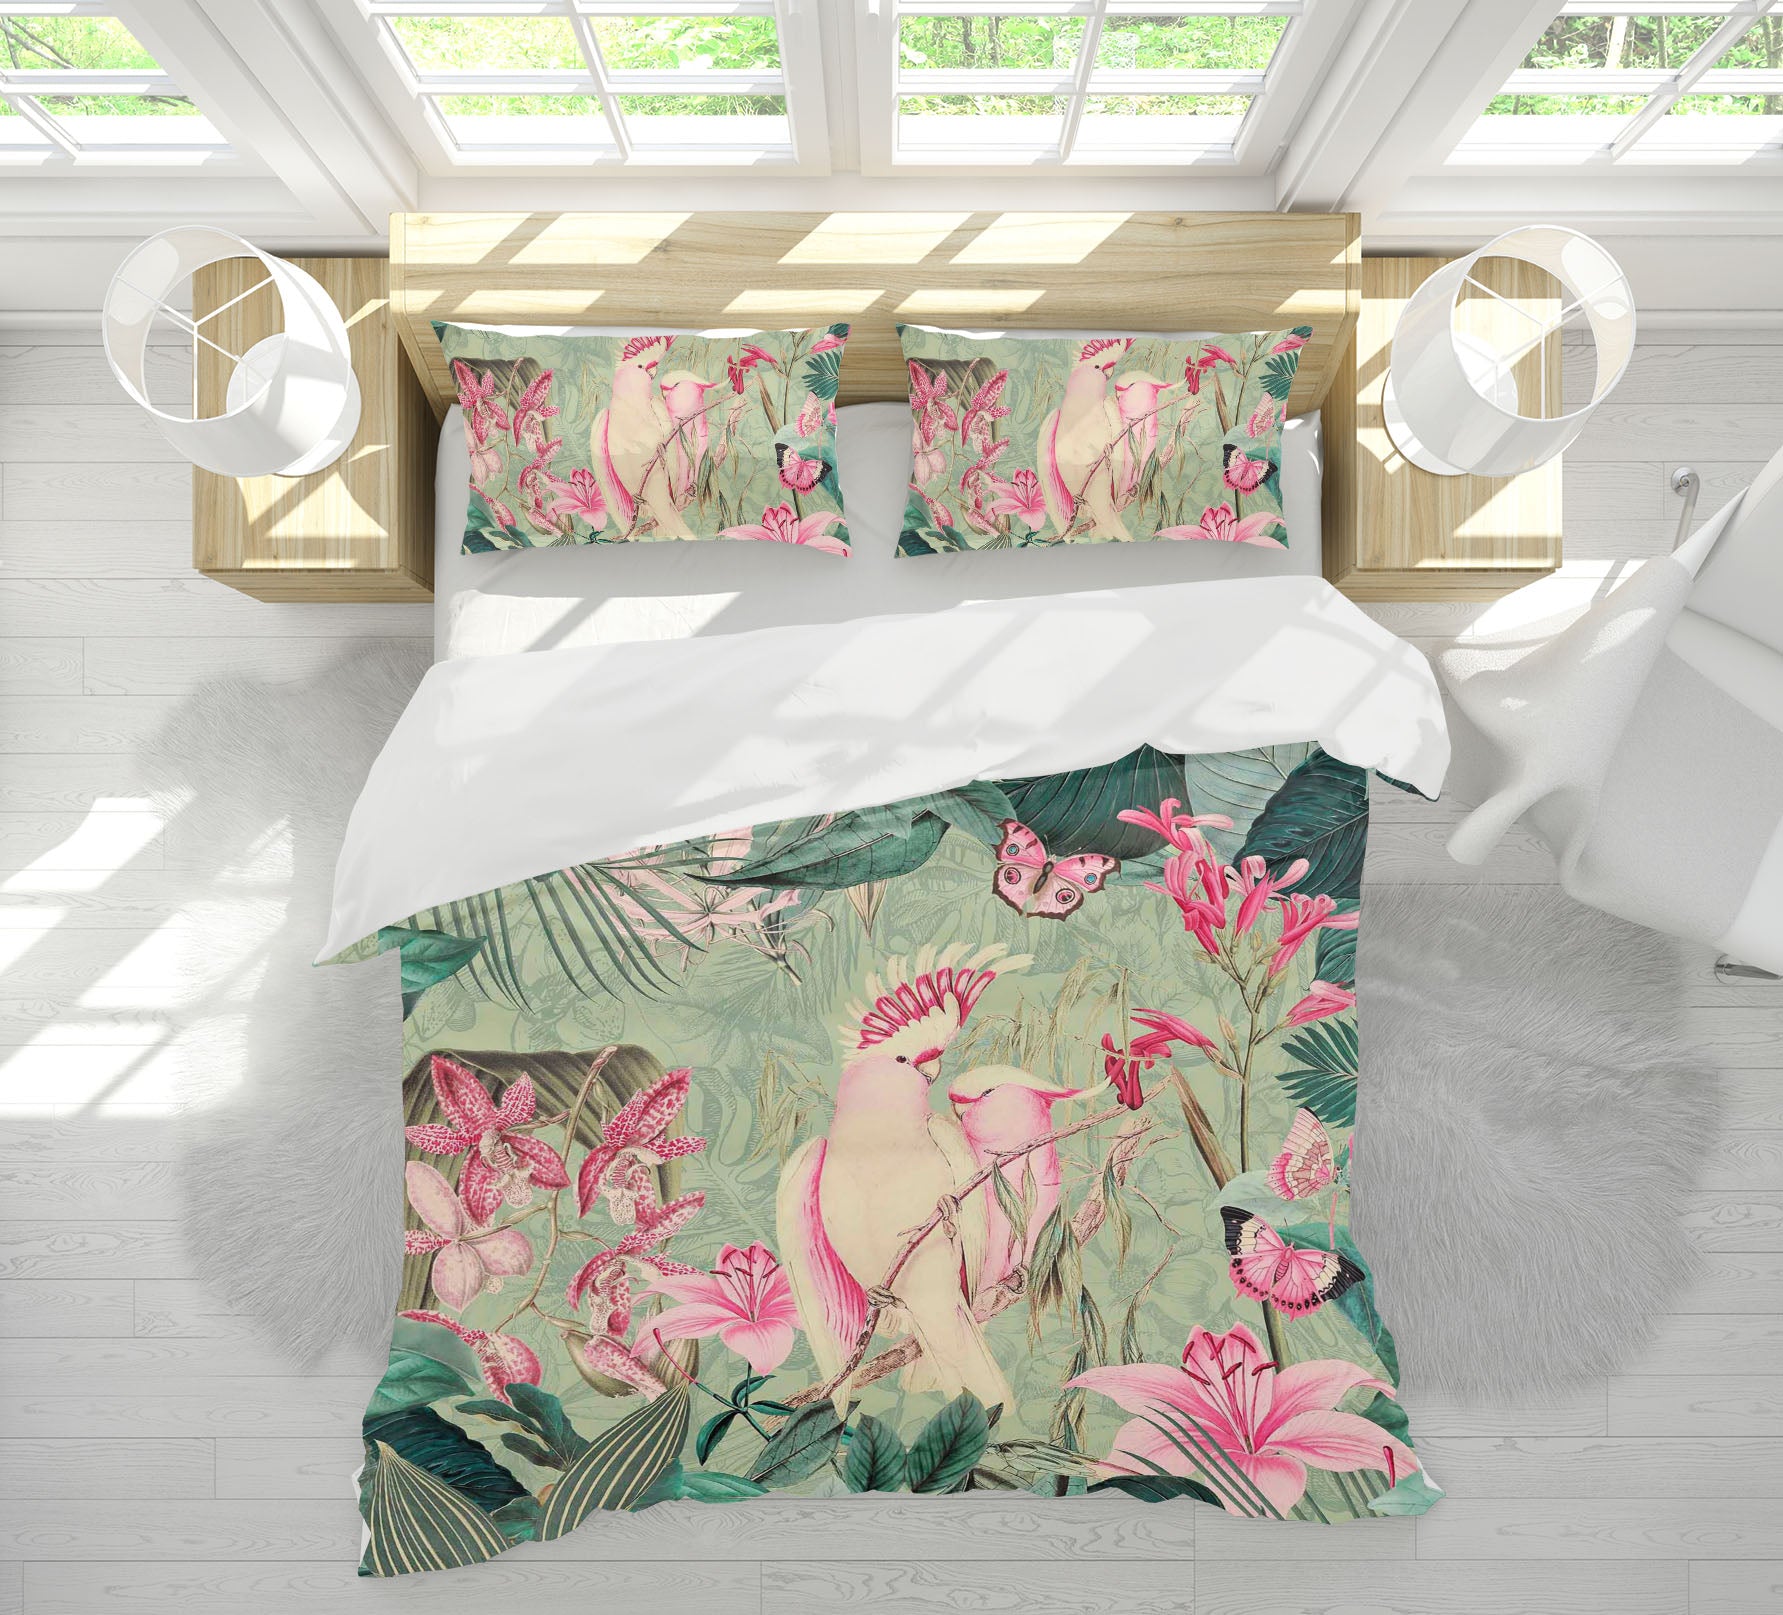 3D Cockatoos And Butterflies 2110 Andrea haase Bedding Bed Pillowcases Quilt